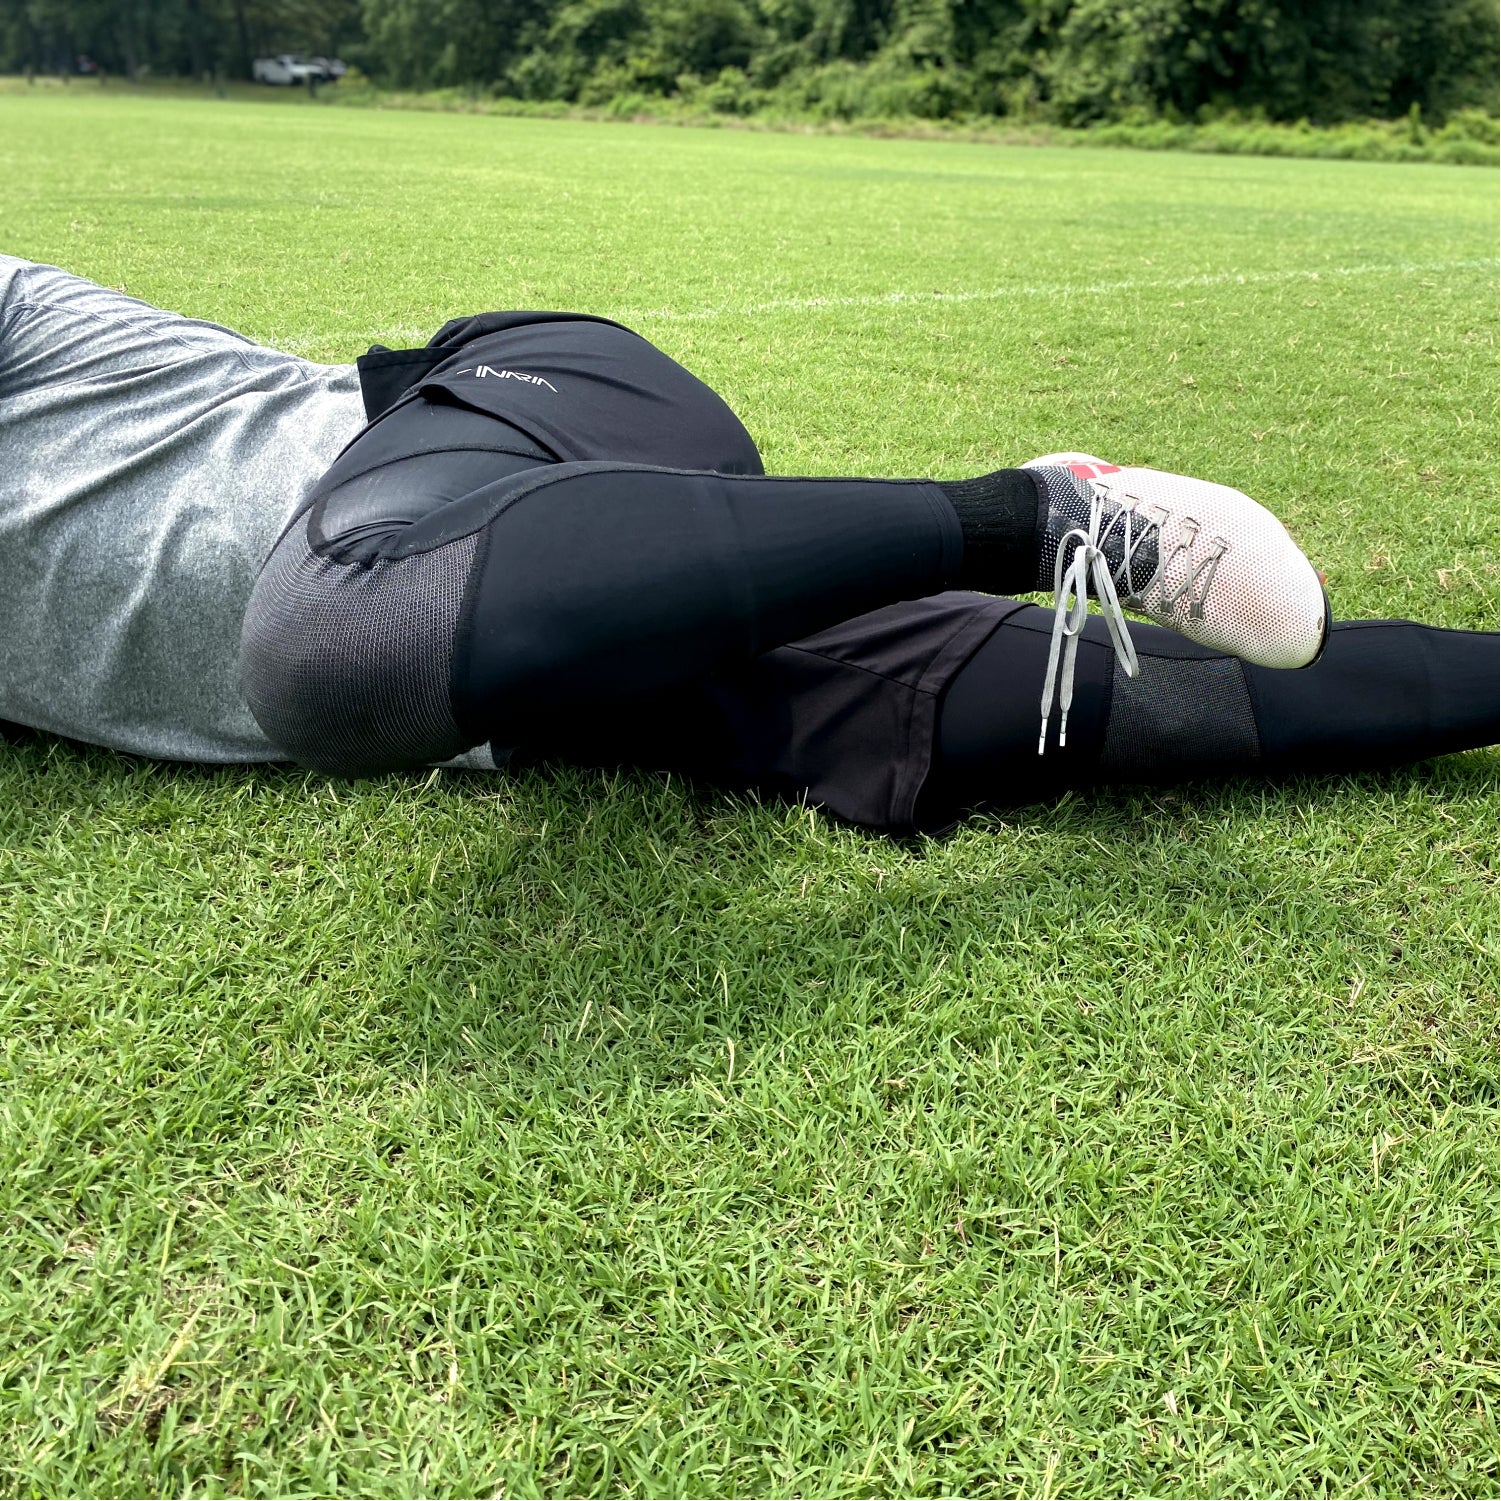 Anti-Turf Burn Goalkeeper Leggings, Extreme Tear Resistance in Knees, For  Training & Matches